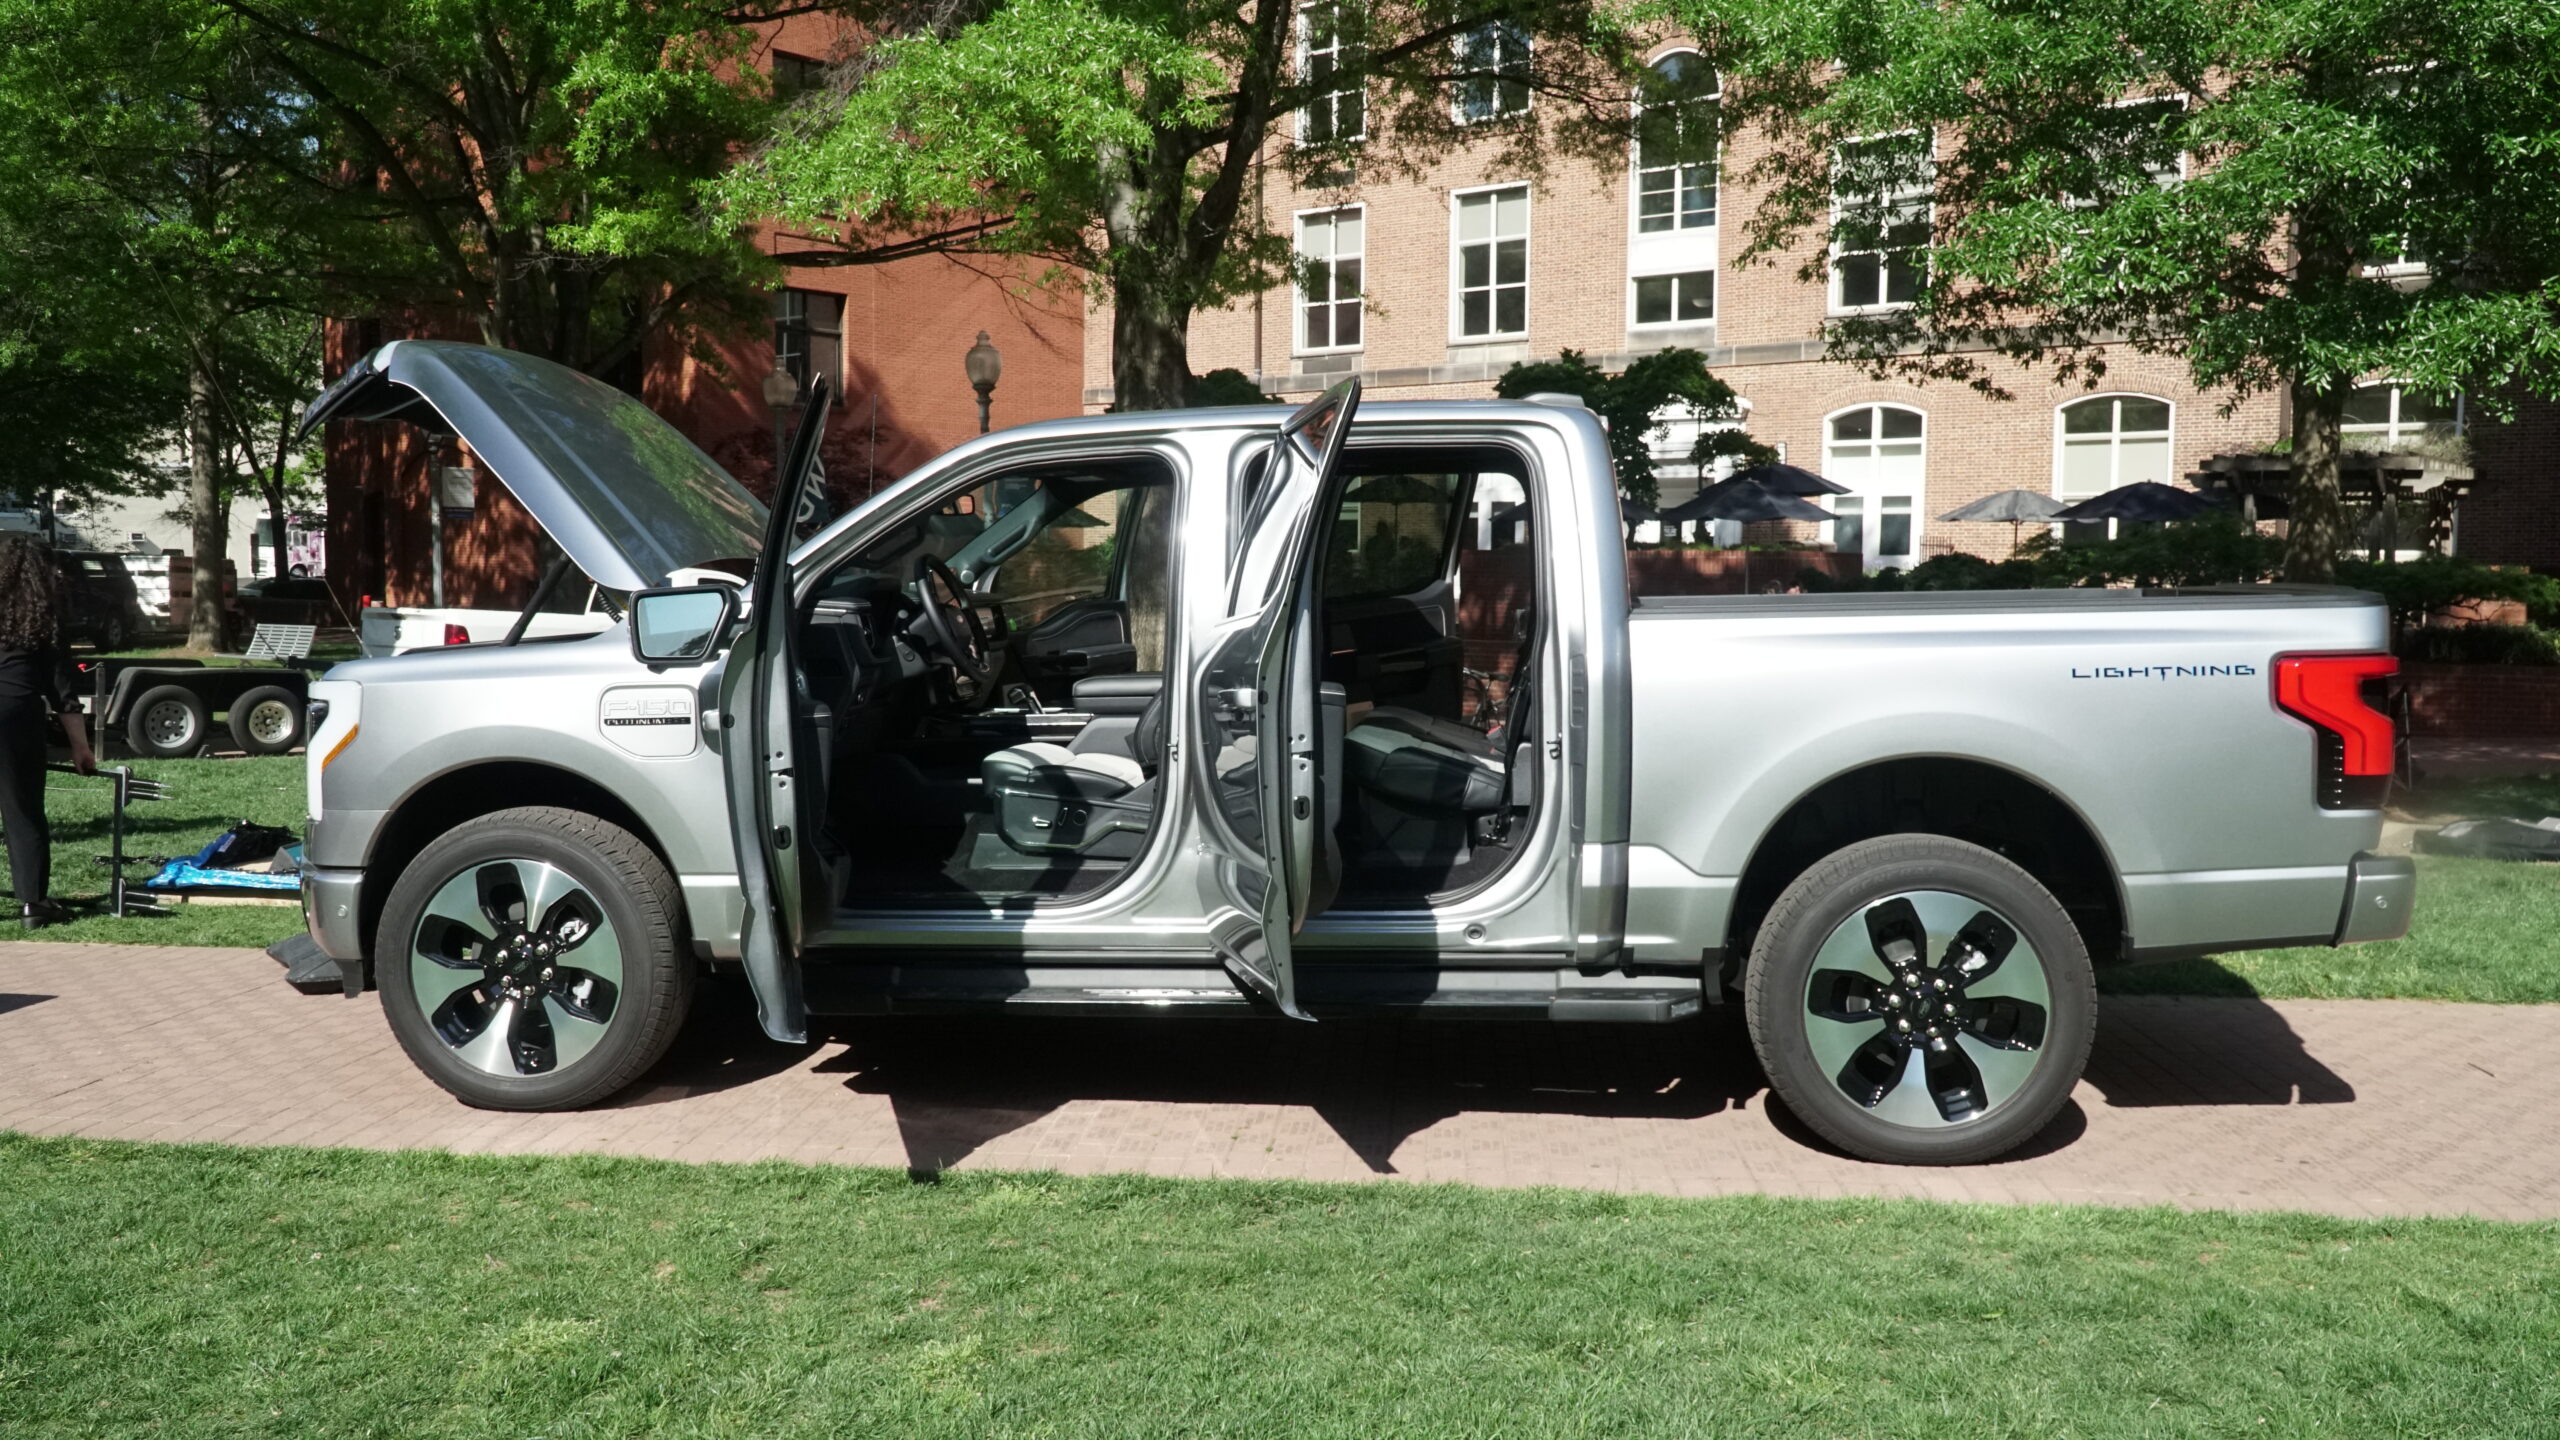 Ford also brought an F-150 Lightning to George Washington University for the Summit.